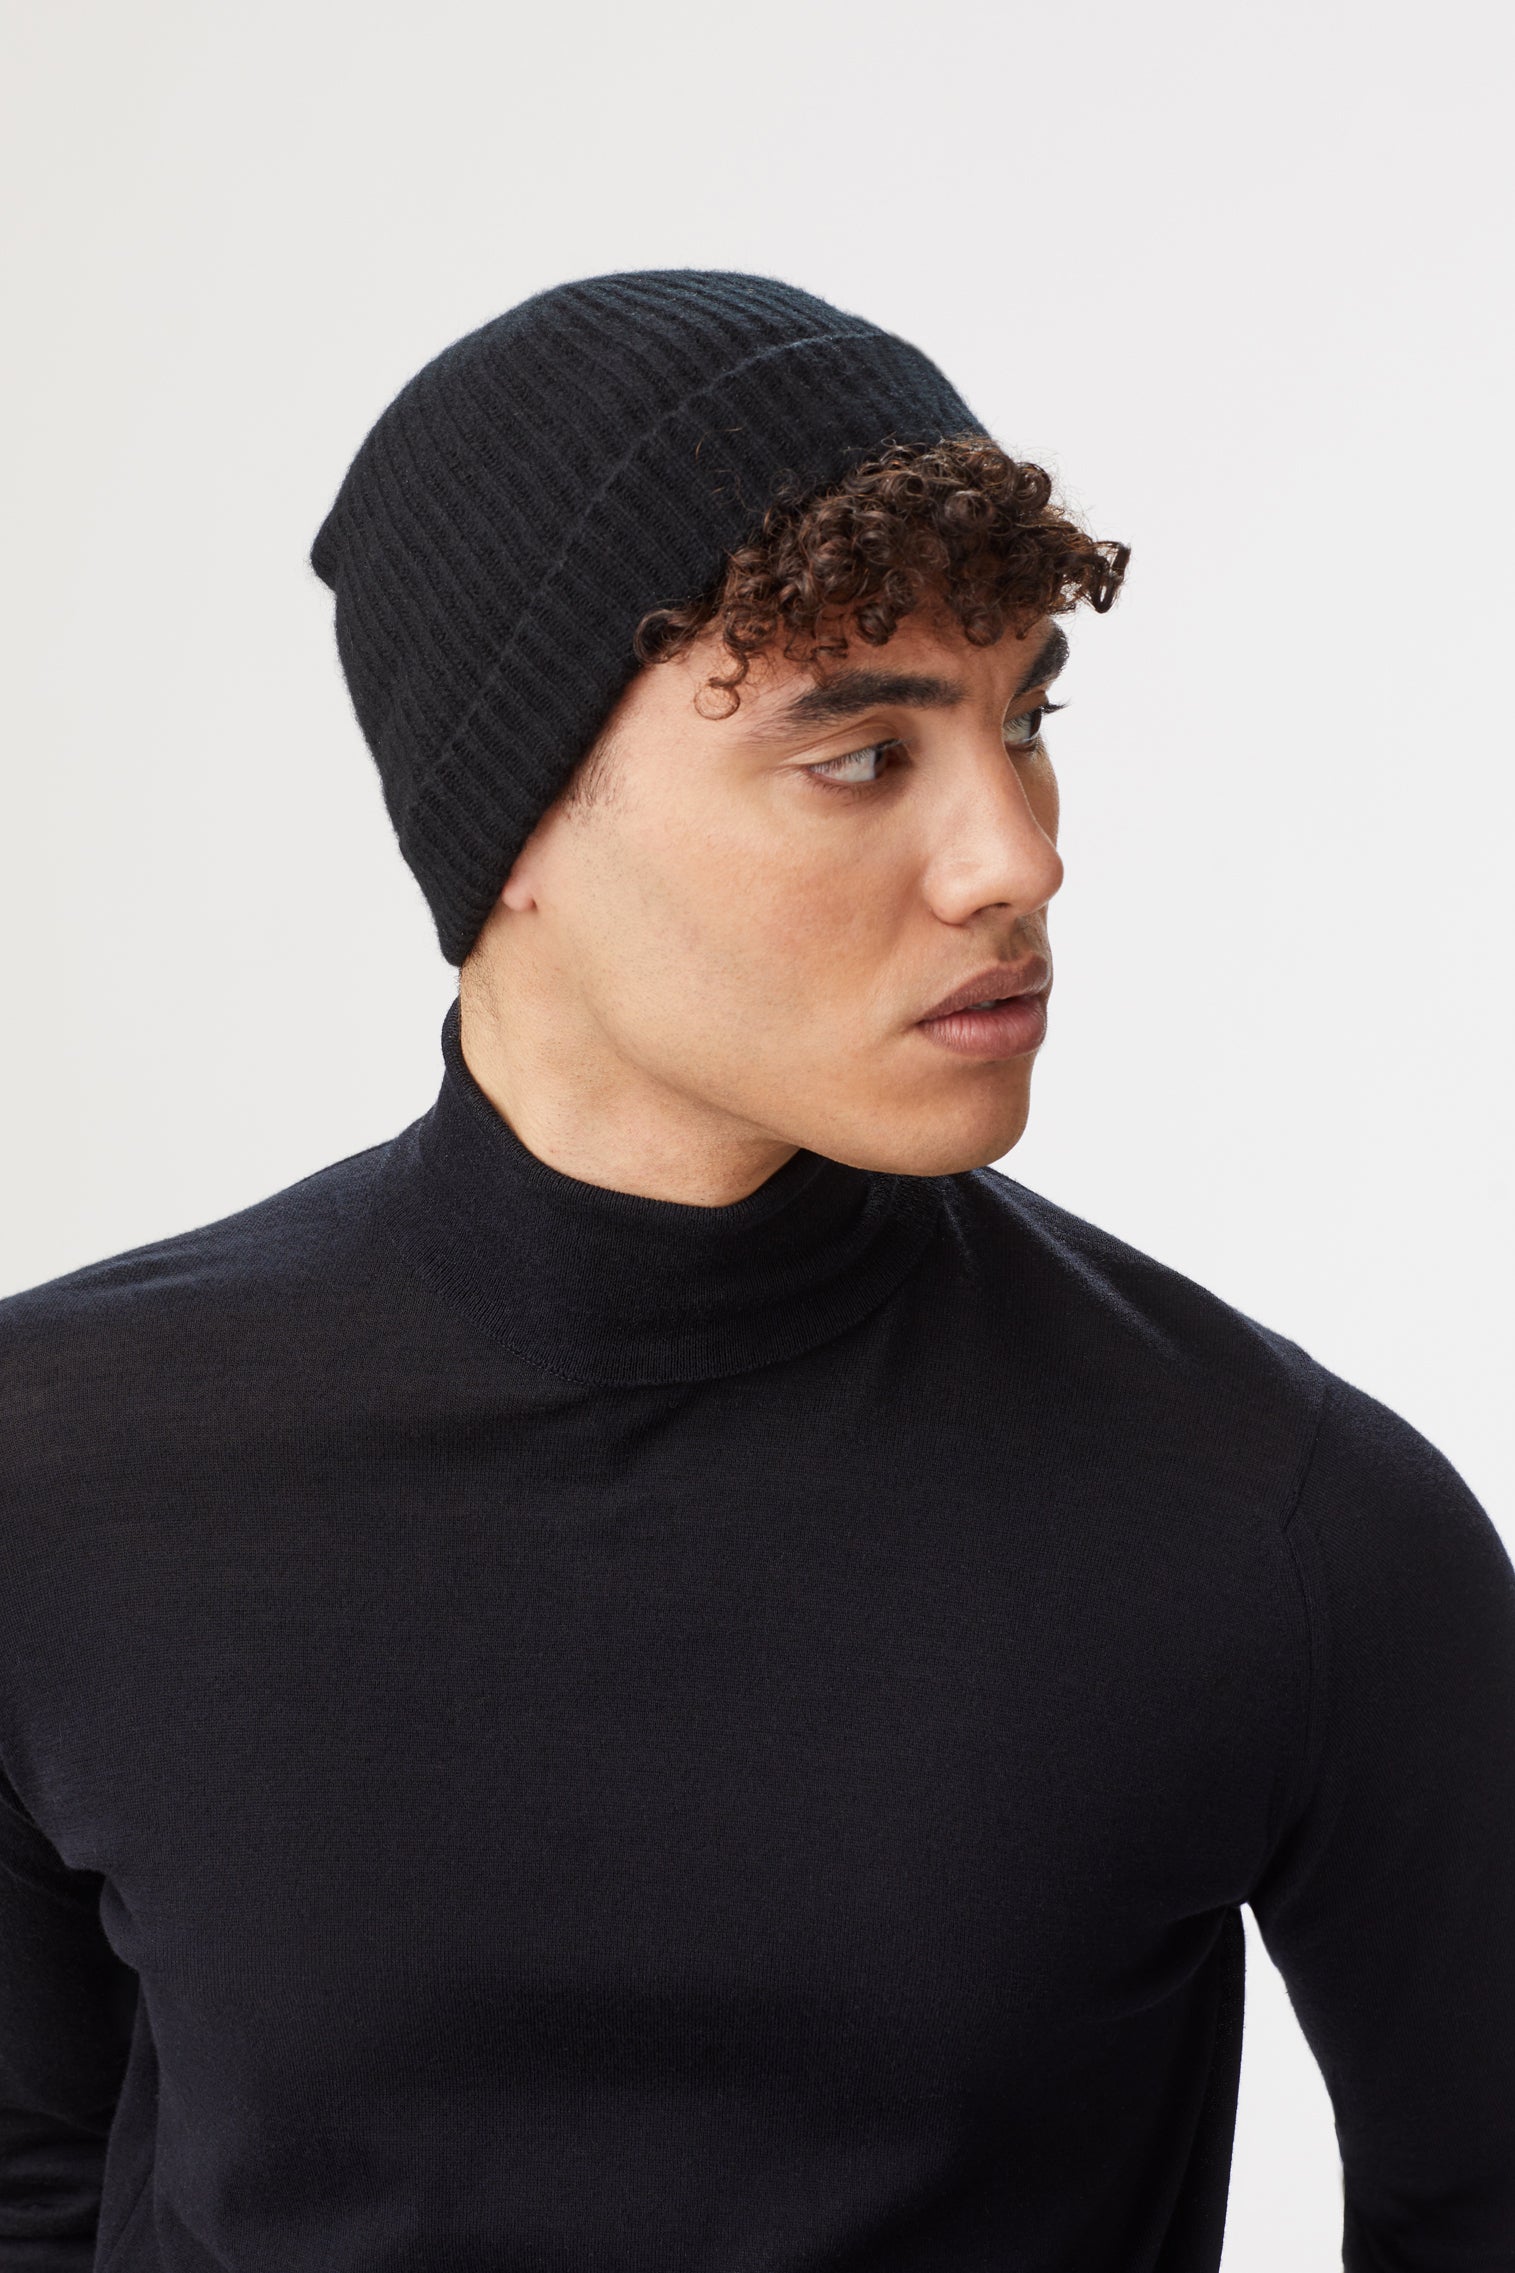 Black Cashmere Ski Beanie - Hats for Tall People - Lock & Co. Hatters London UK